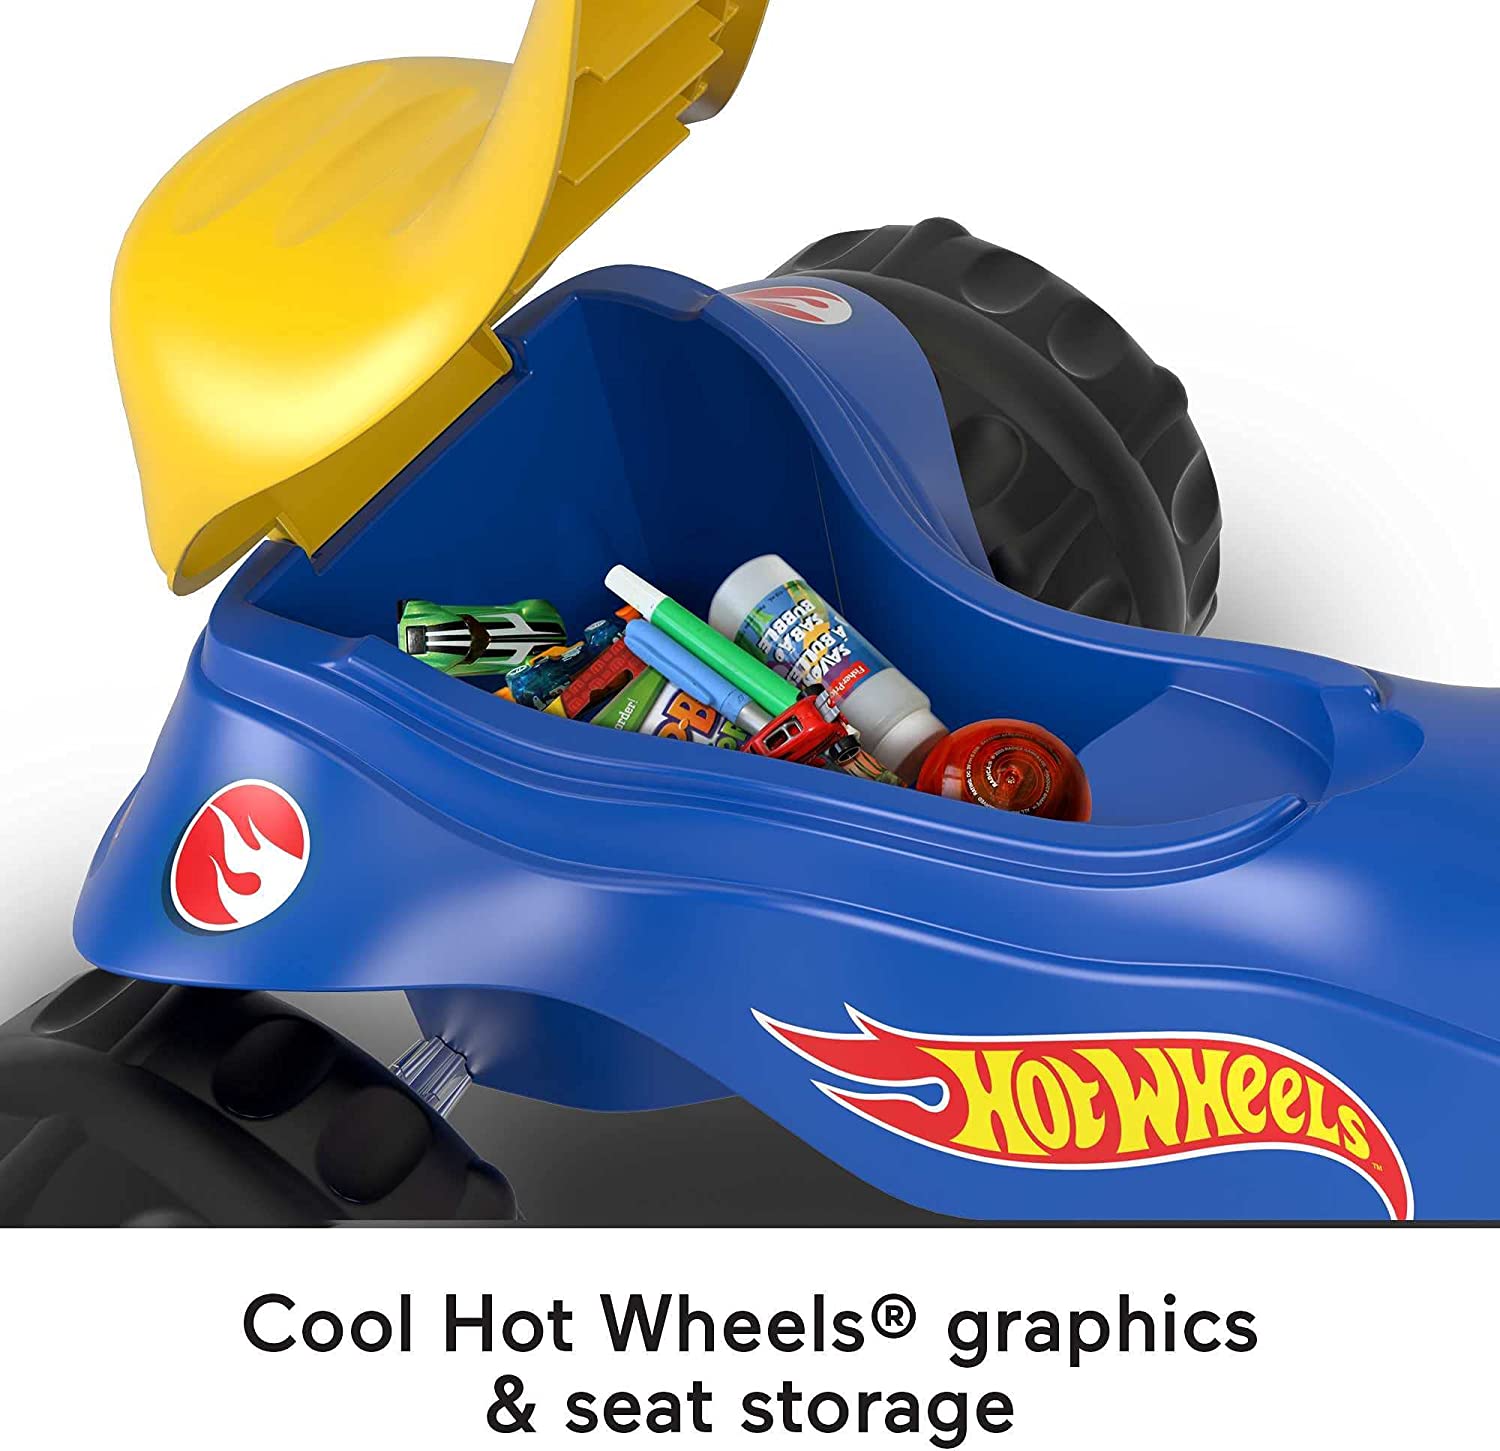 Fisher-Price Hot Wheels Tough Trike - with Awesome Hot Wheels Colors and Graphics